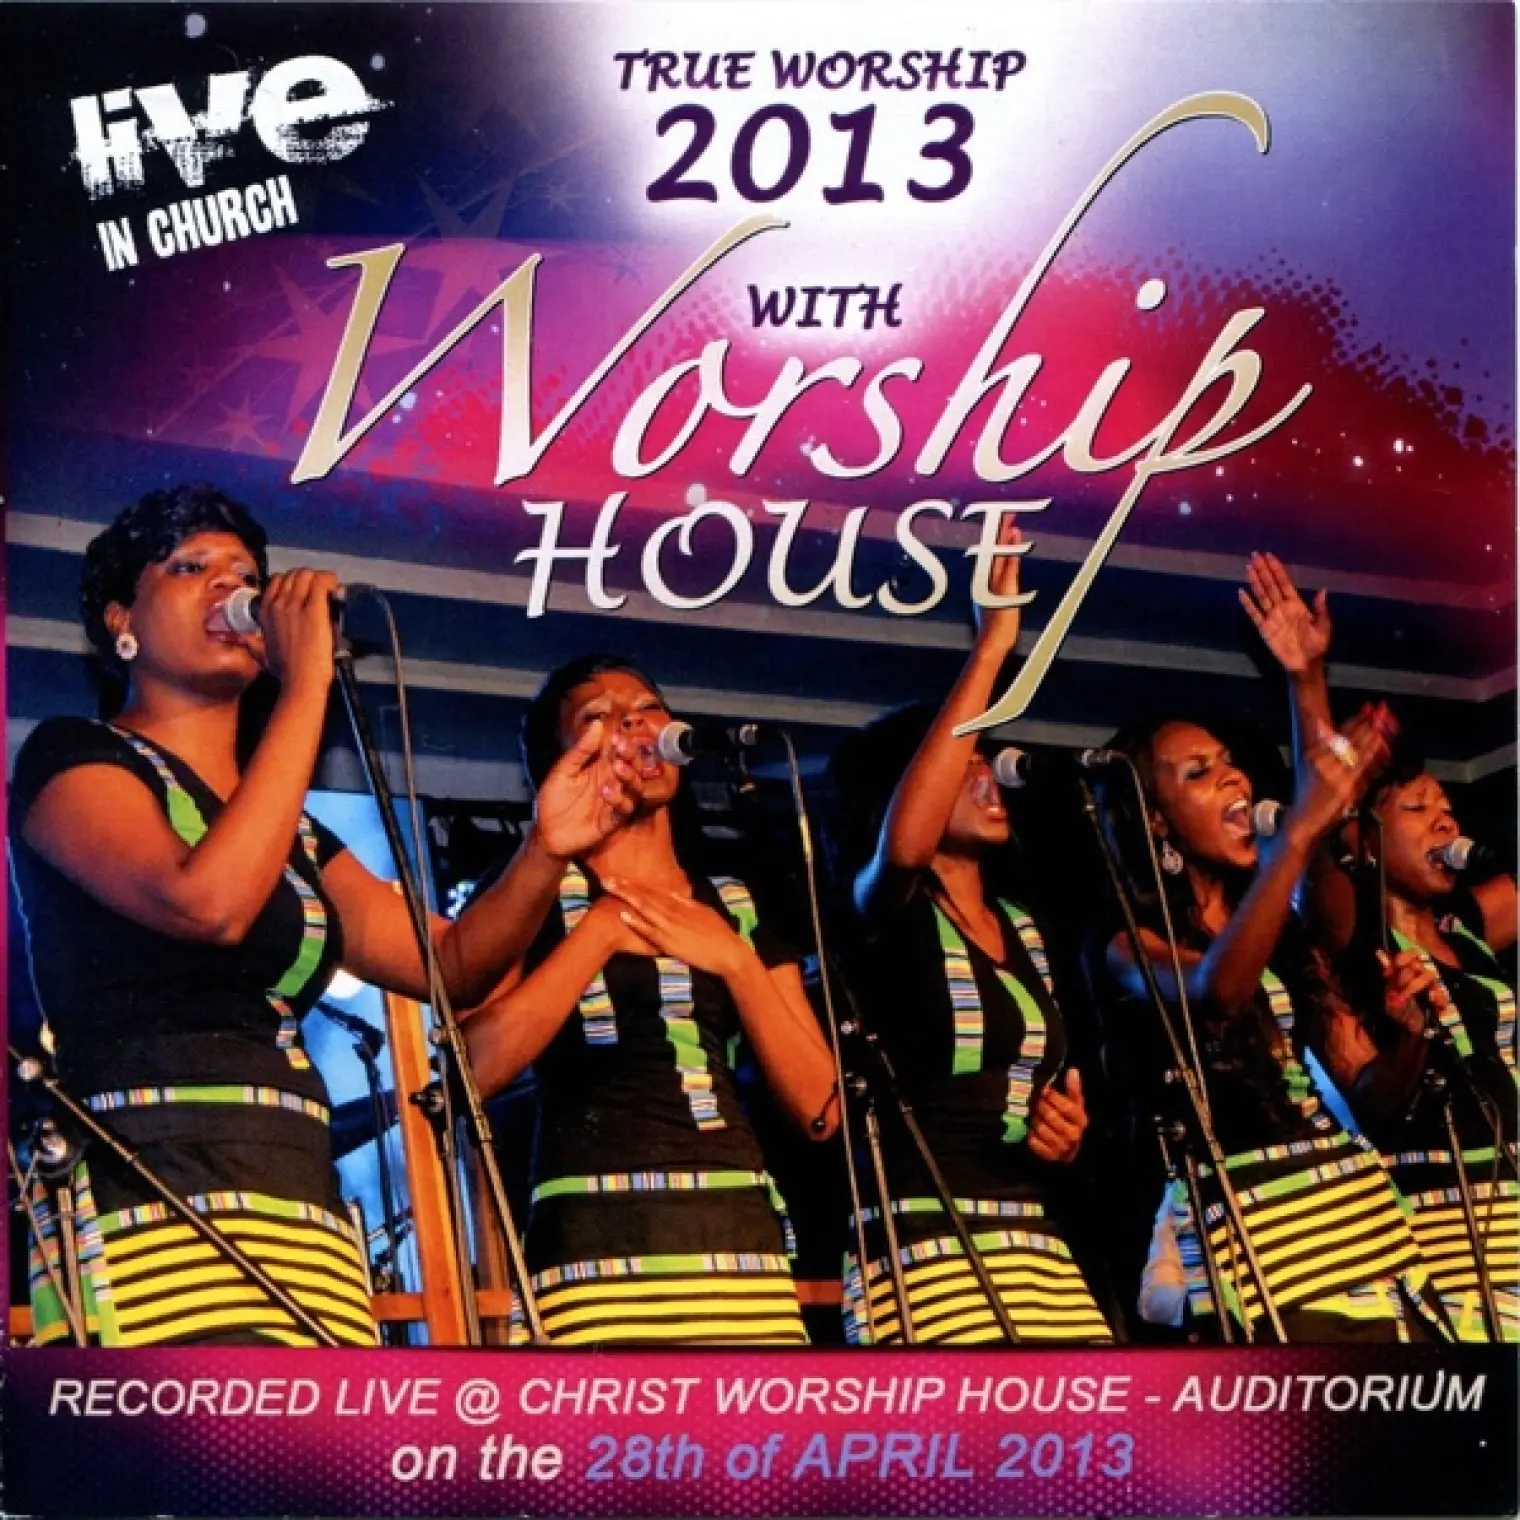 True Worship 2013: Recorded Live at the Christ Worship House Auditorium -  Worship House 